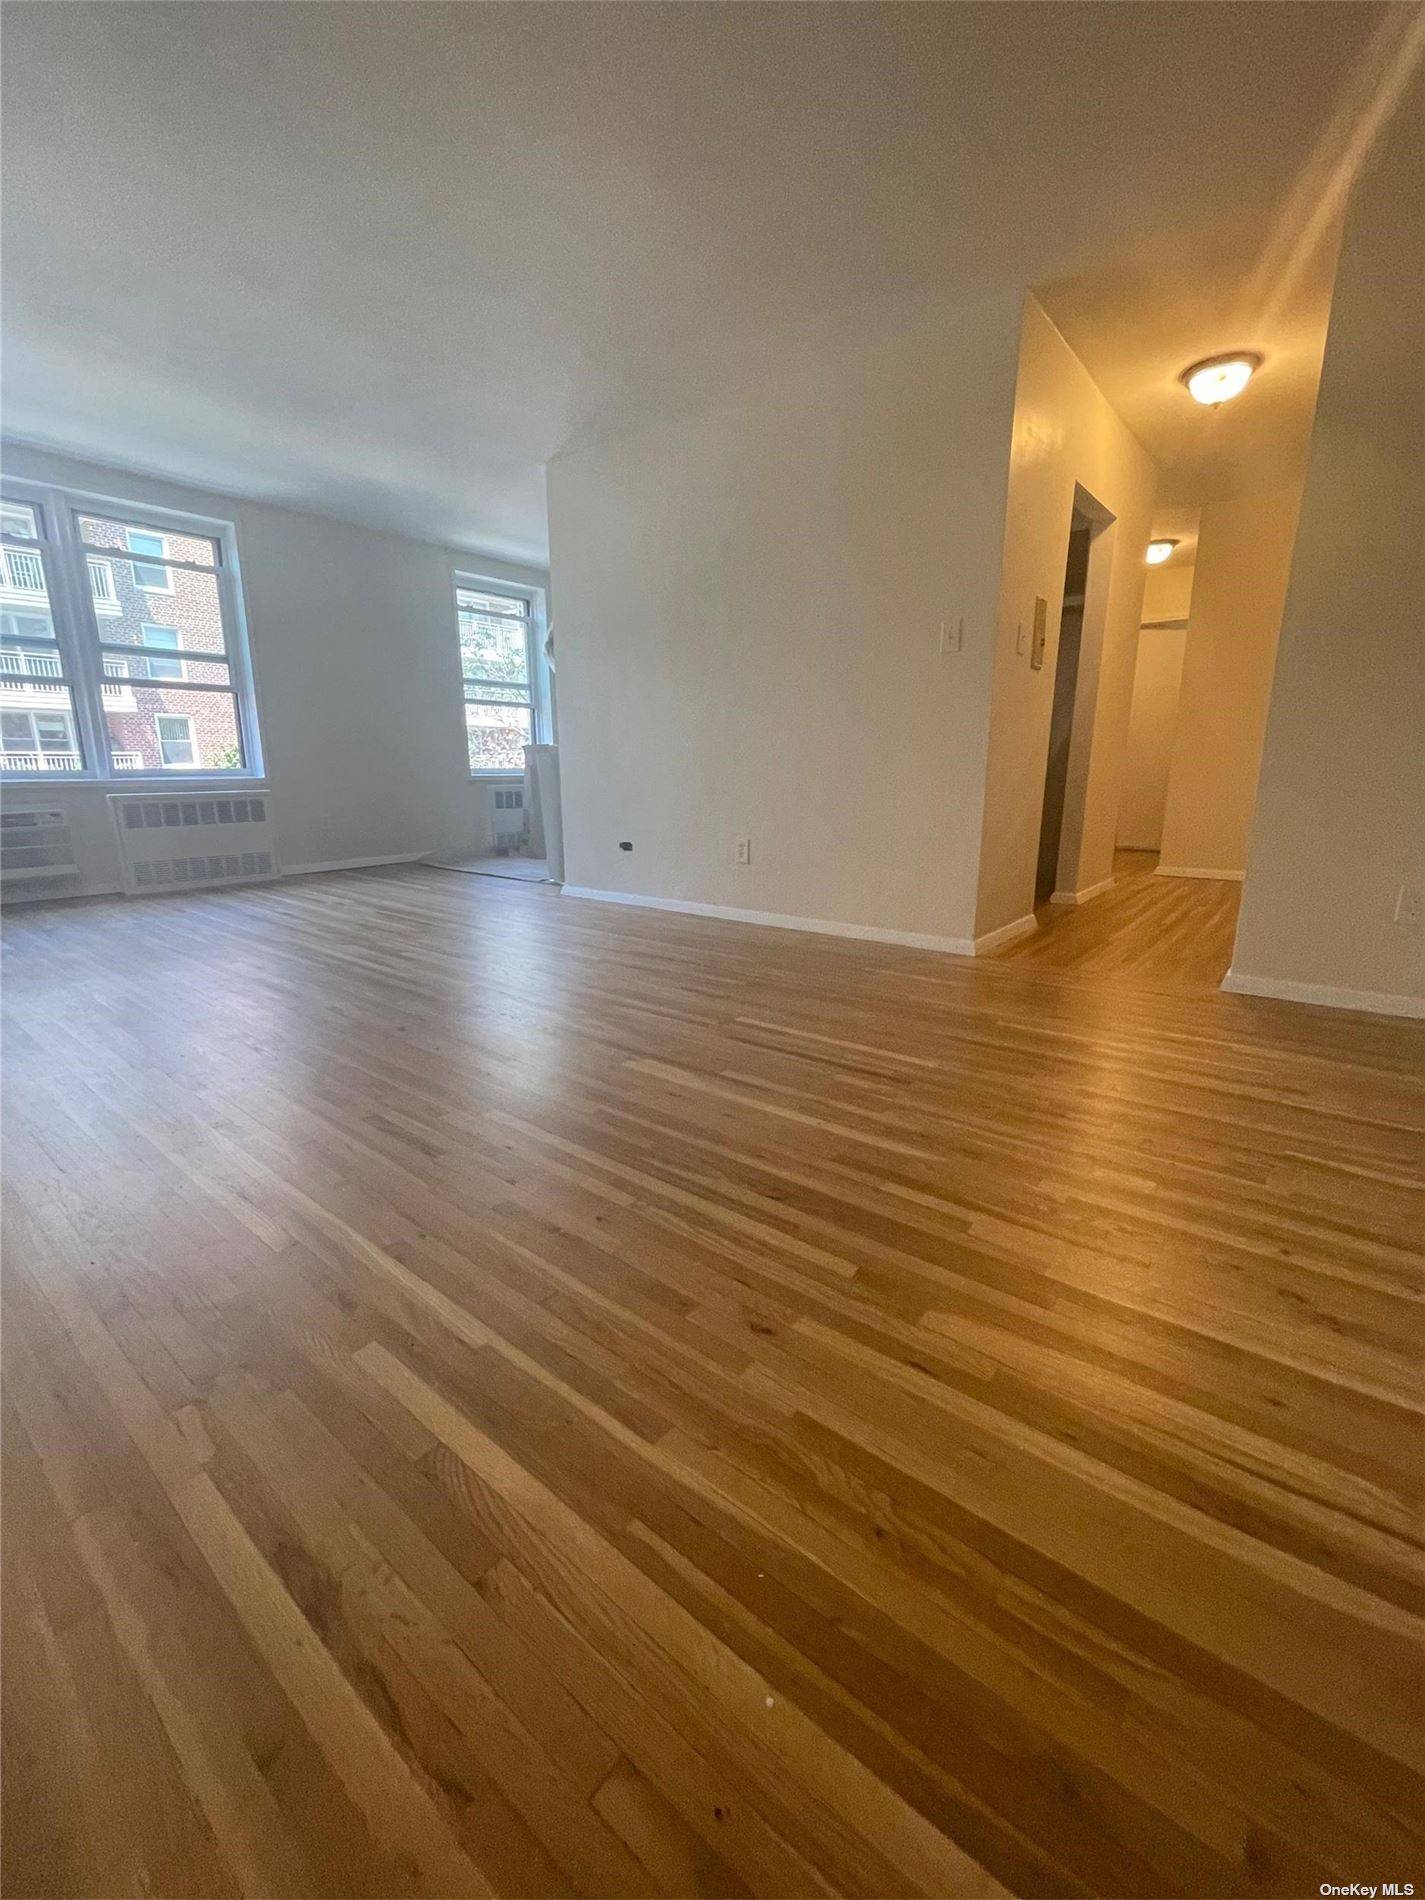 CHARMING 1BED, 1BATH CORNER UNIT CO OP ON THE SECOND FLOOR IN A WELL MAINTAINED ELEVATOR BUILDING ON A QUIET STREET THIS CHARMING APARTMENT RECEIVES PLENTY OF NATURAL SUNLIGHT, BEAUTIFUL ...